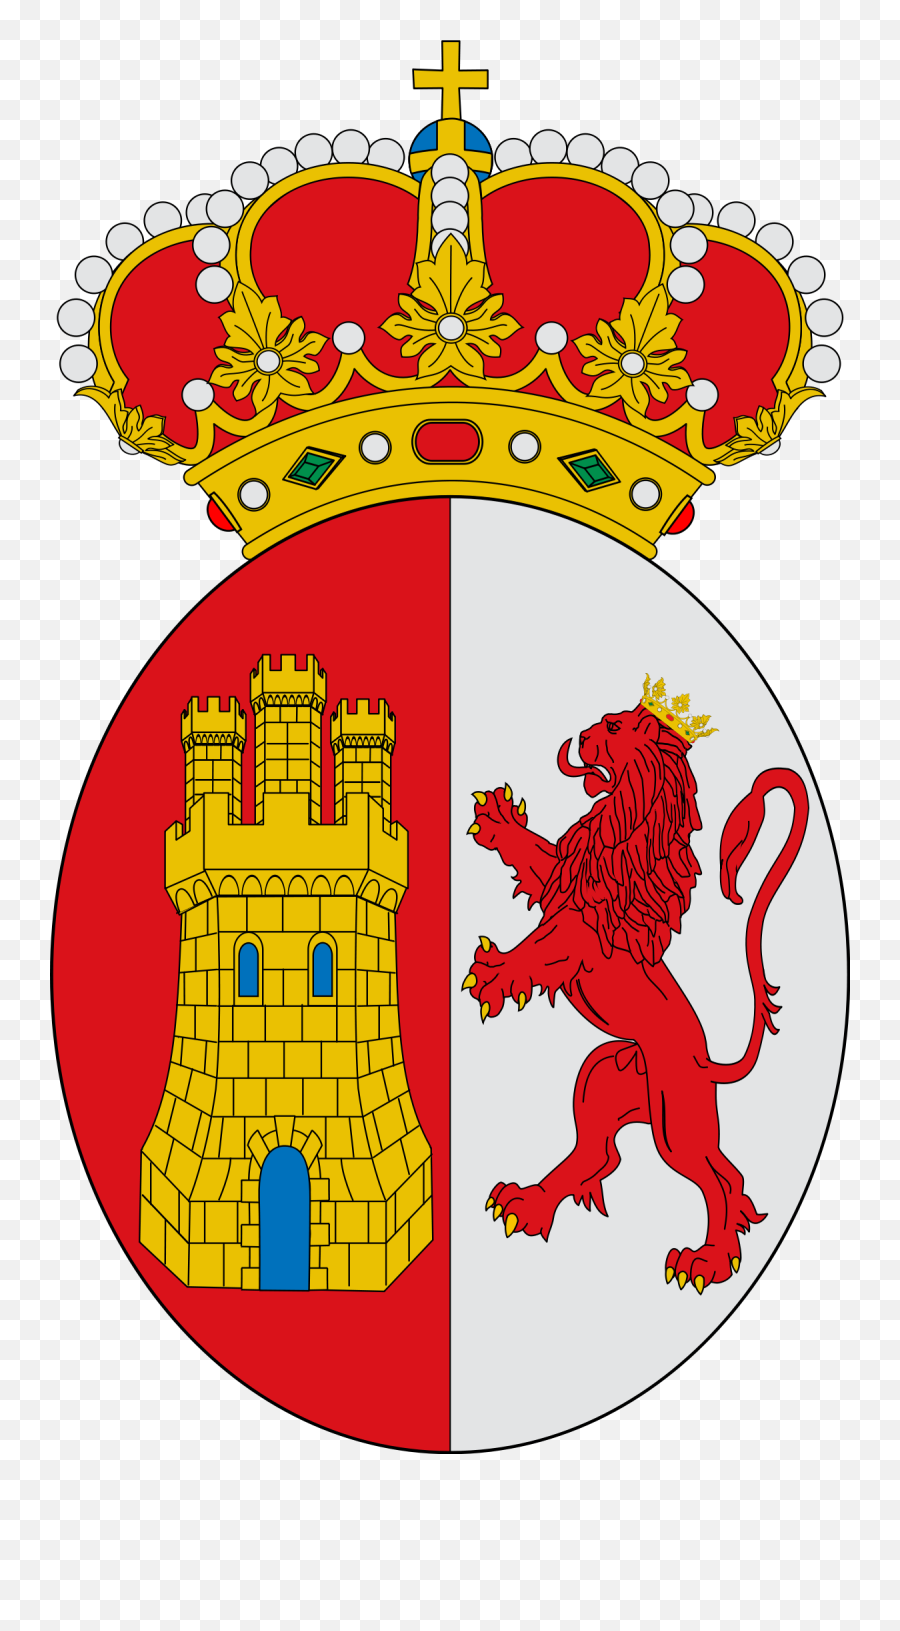 Filecoat Of Arms New Spainsvg - Wikipedia Spanish Empire Coat Of Arms Png,Imageshack Icon